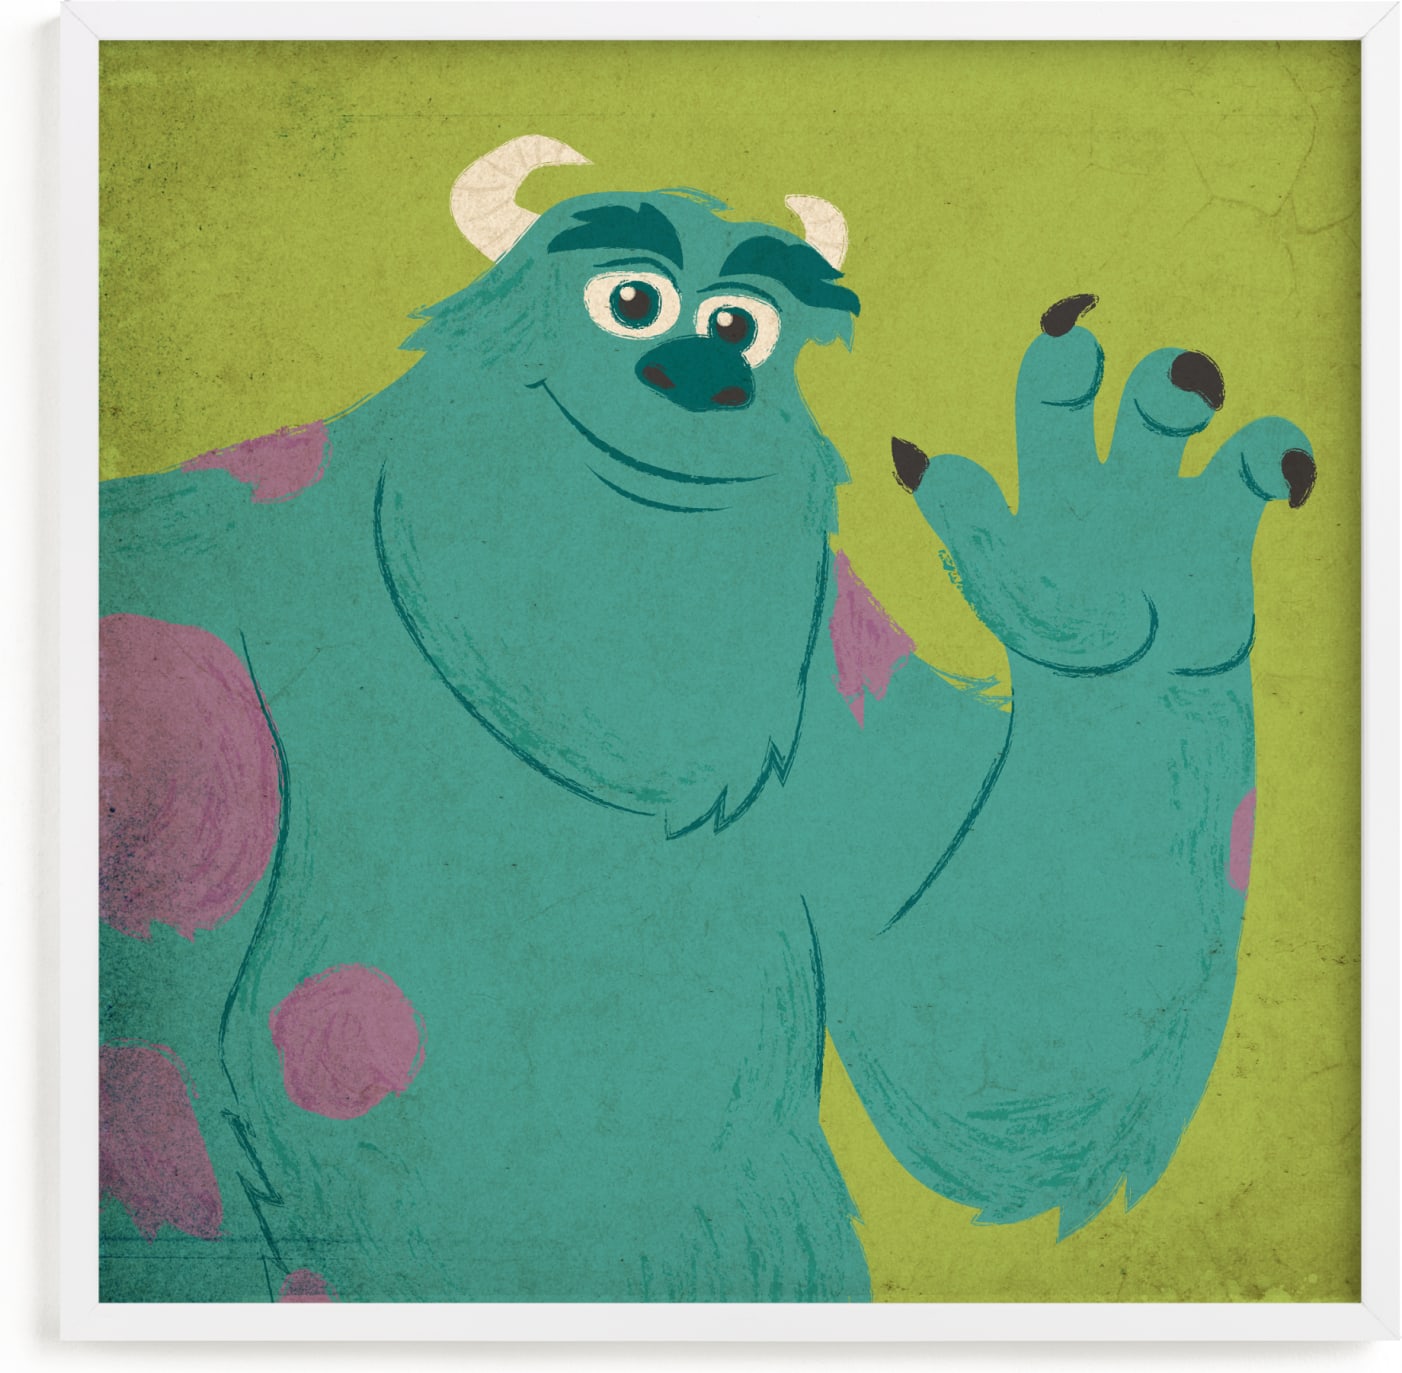 This is a green disney art by Kiersten Garner called Sulley from Disney and Pixar's Monster's Inc.